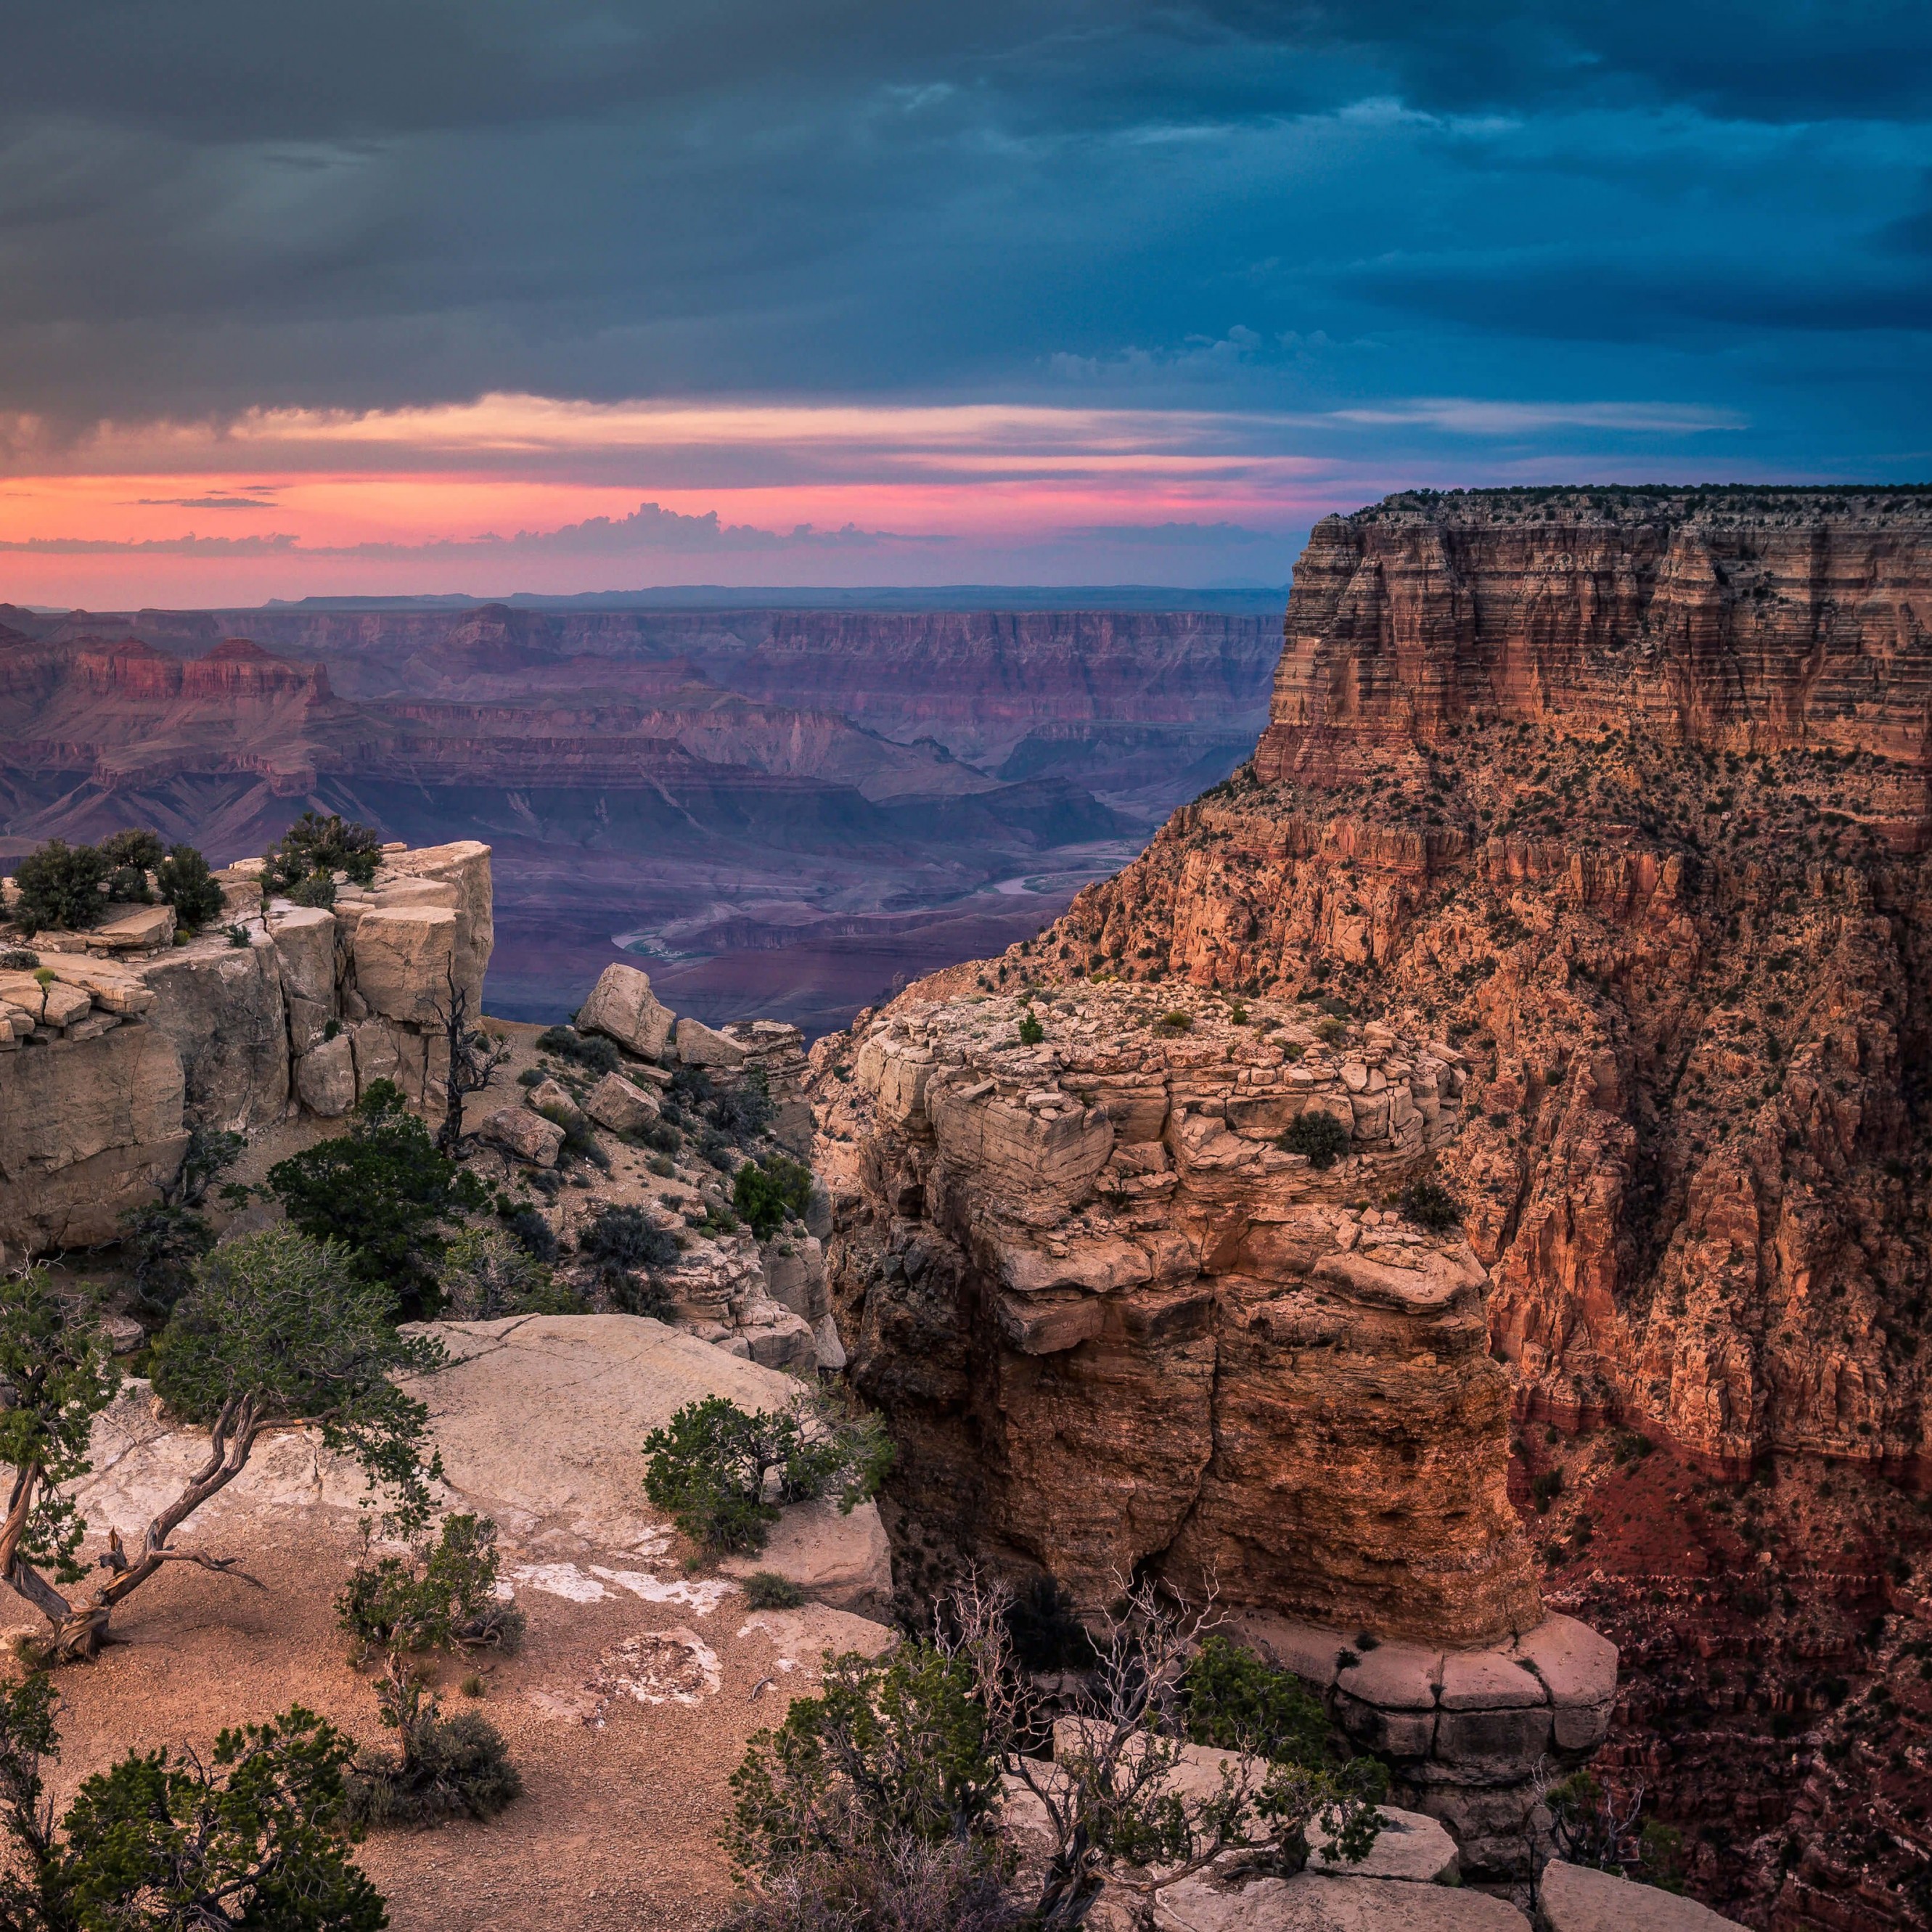 Sunset At The Grand Canyon Wallpaper for Apple iPhone 6 Plus